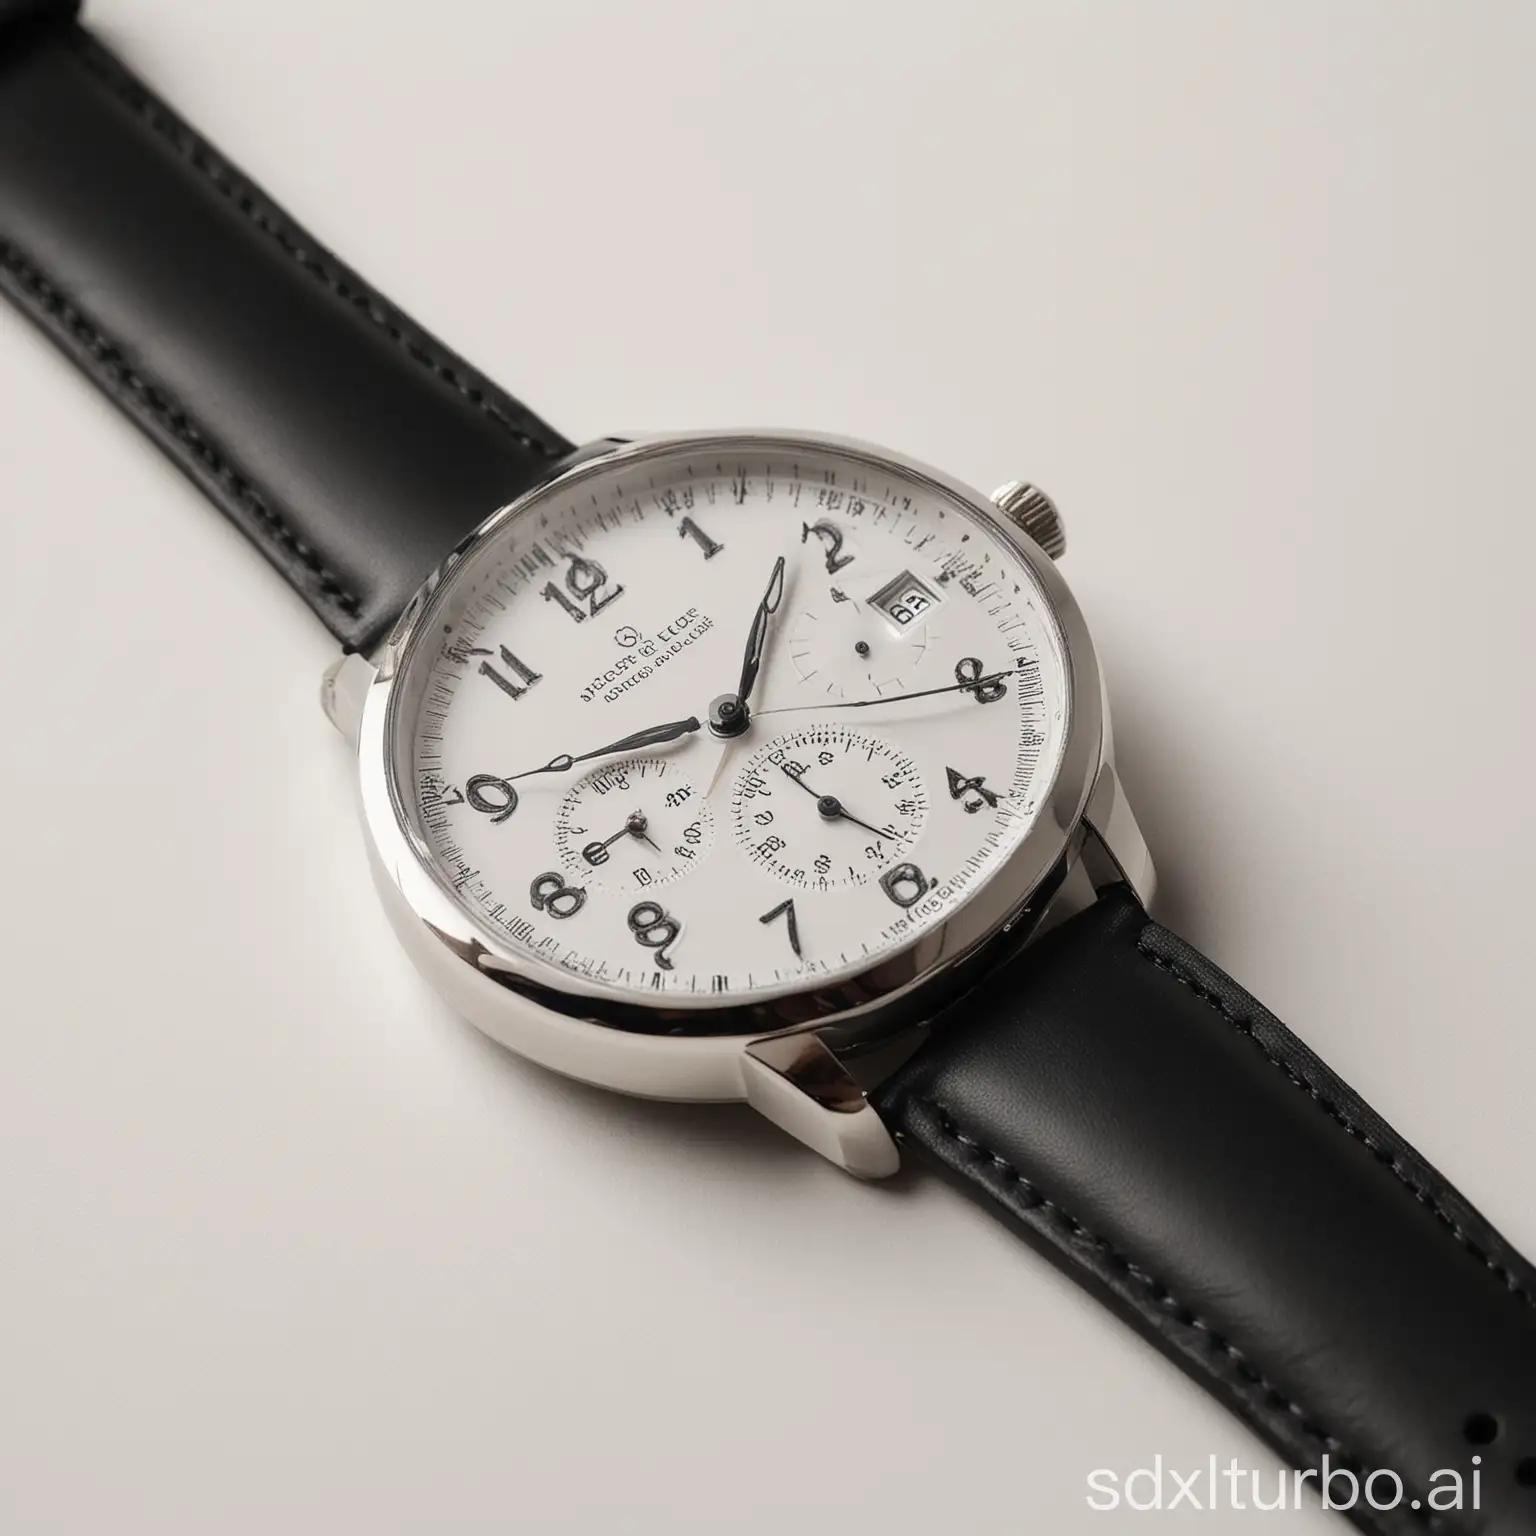 Closeup-Silver-Watch-with-Black-Leather-Band-and-Date-Window